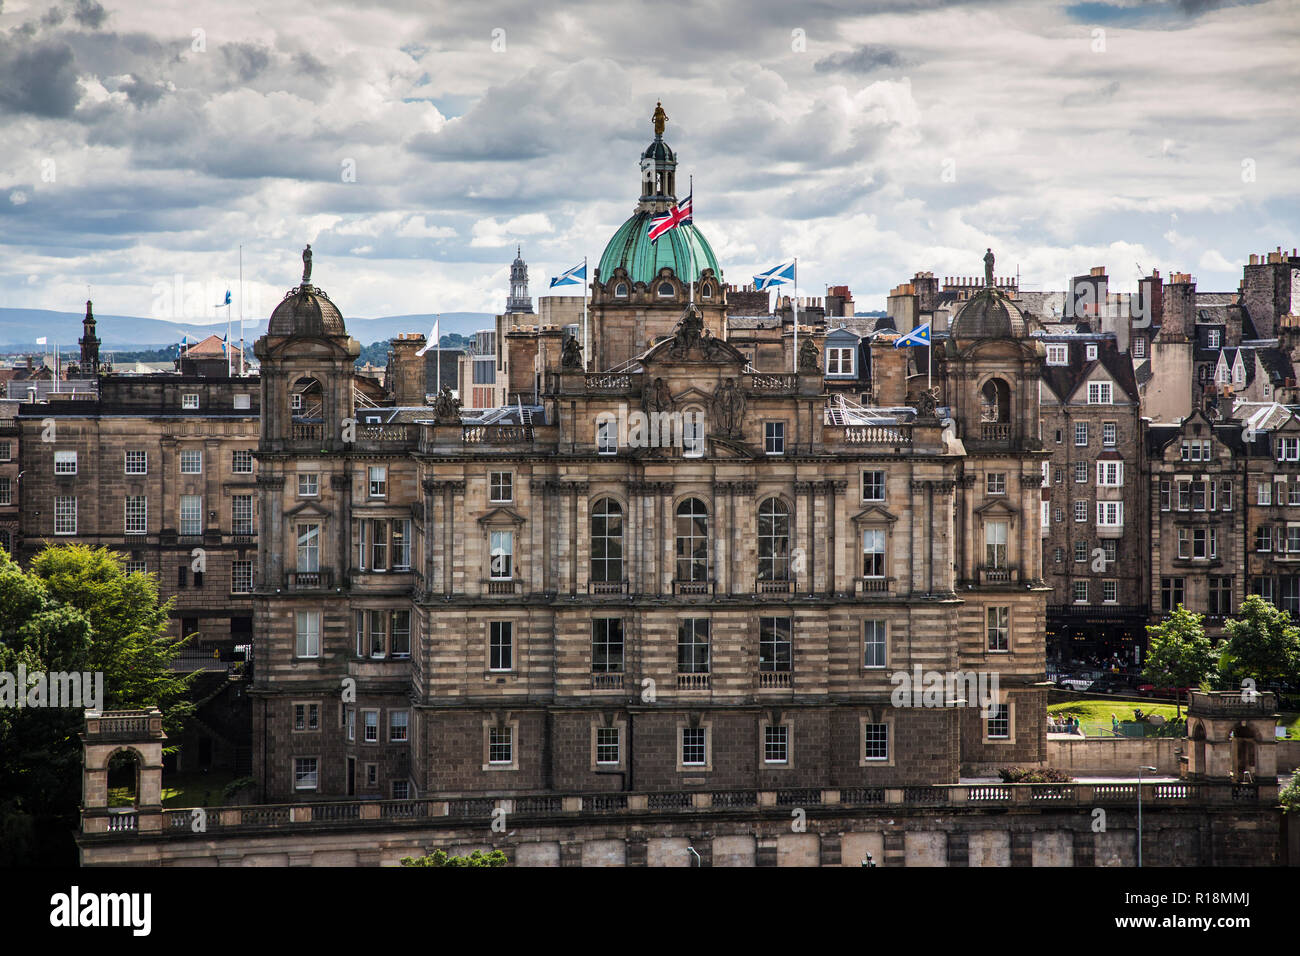 Royal Bank of Scotland (RBS) building in Old Town Edinburgh, now a museum. Scotland. Stock Photo